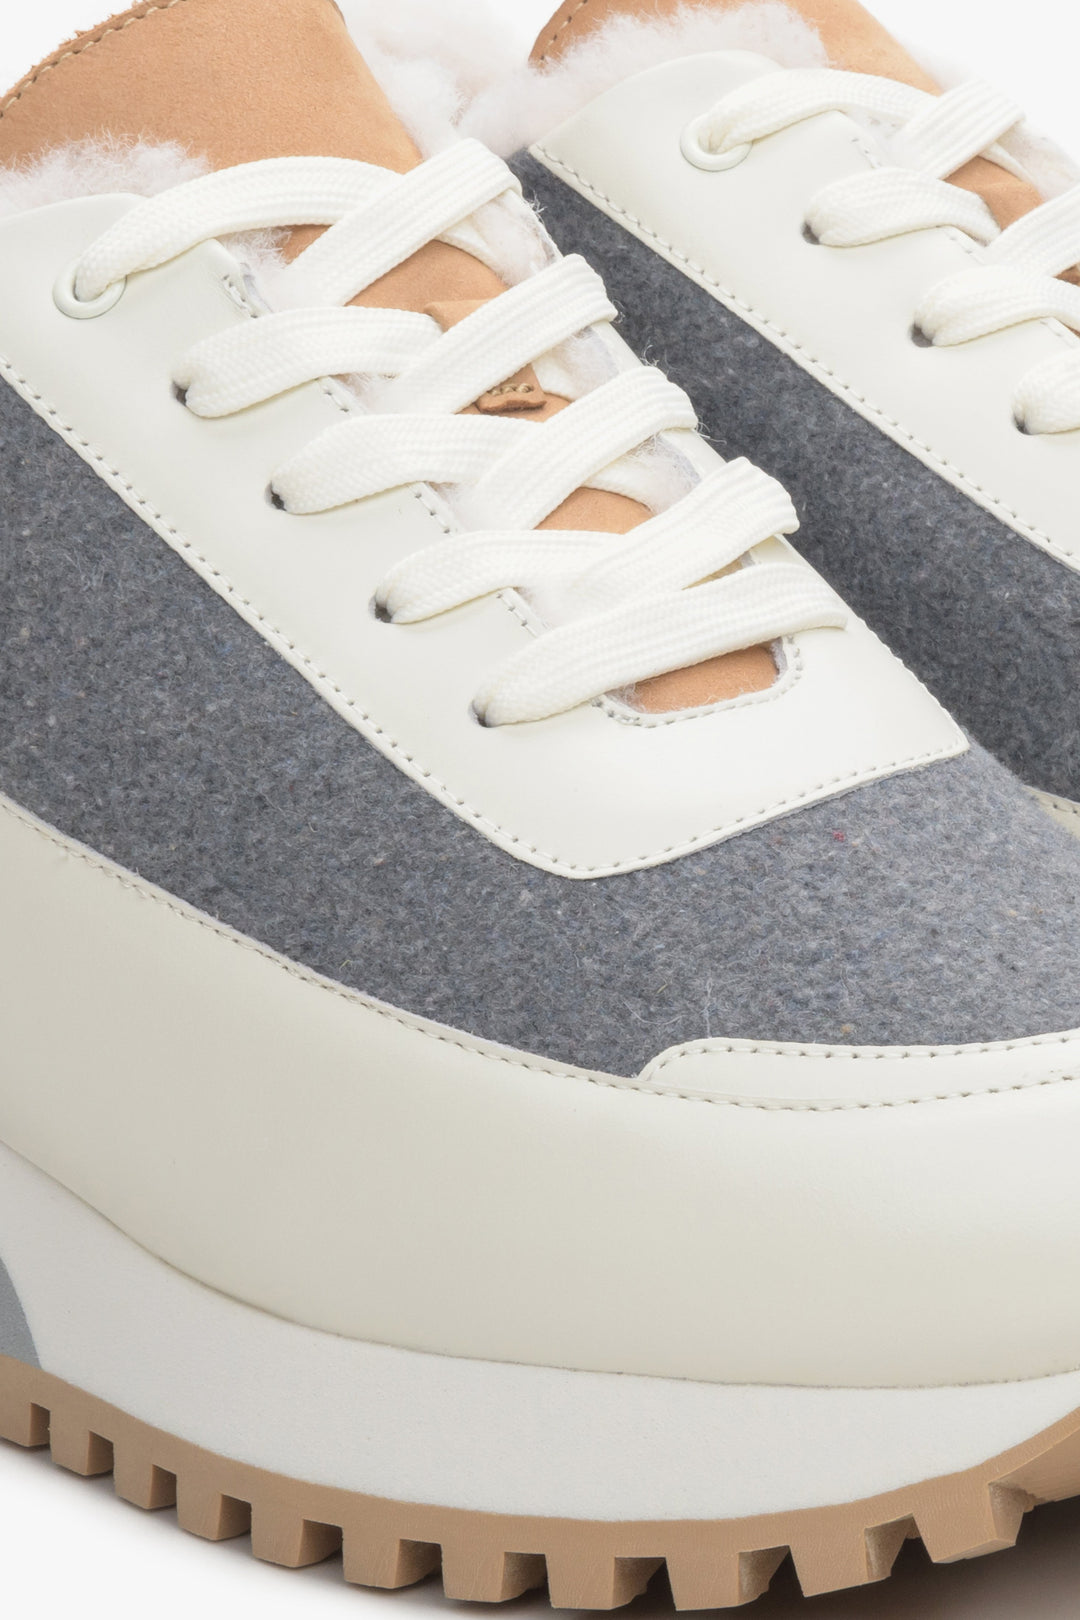 Women's leather sneakers by Estro - close-up on the details.